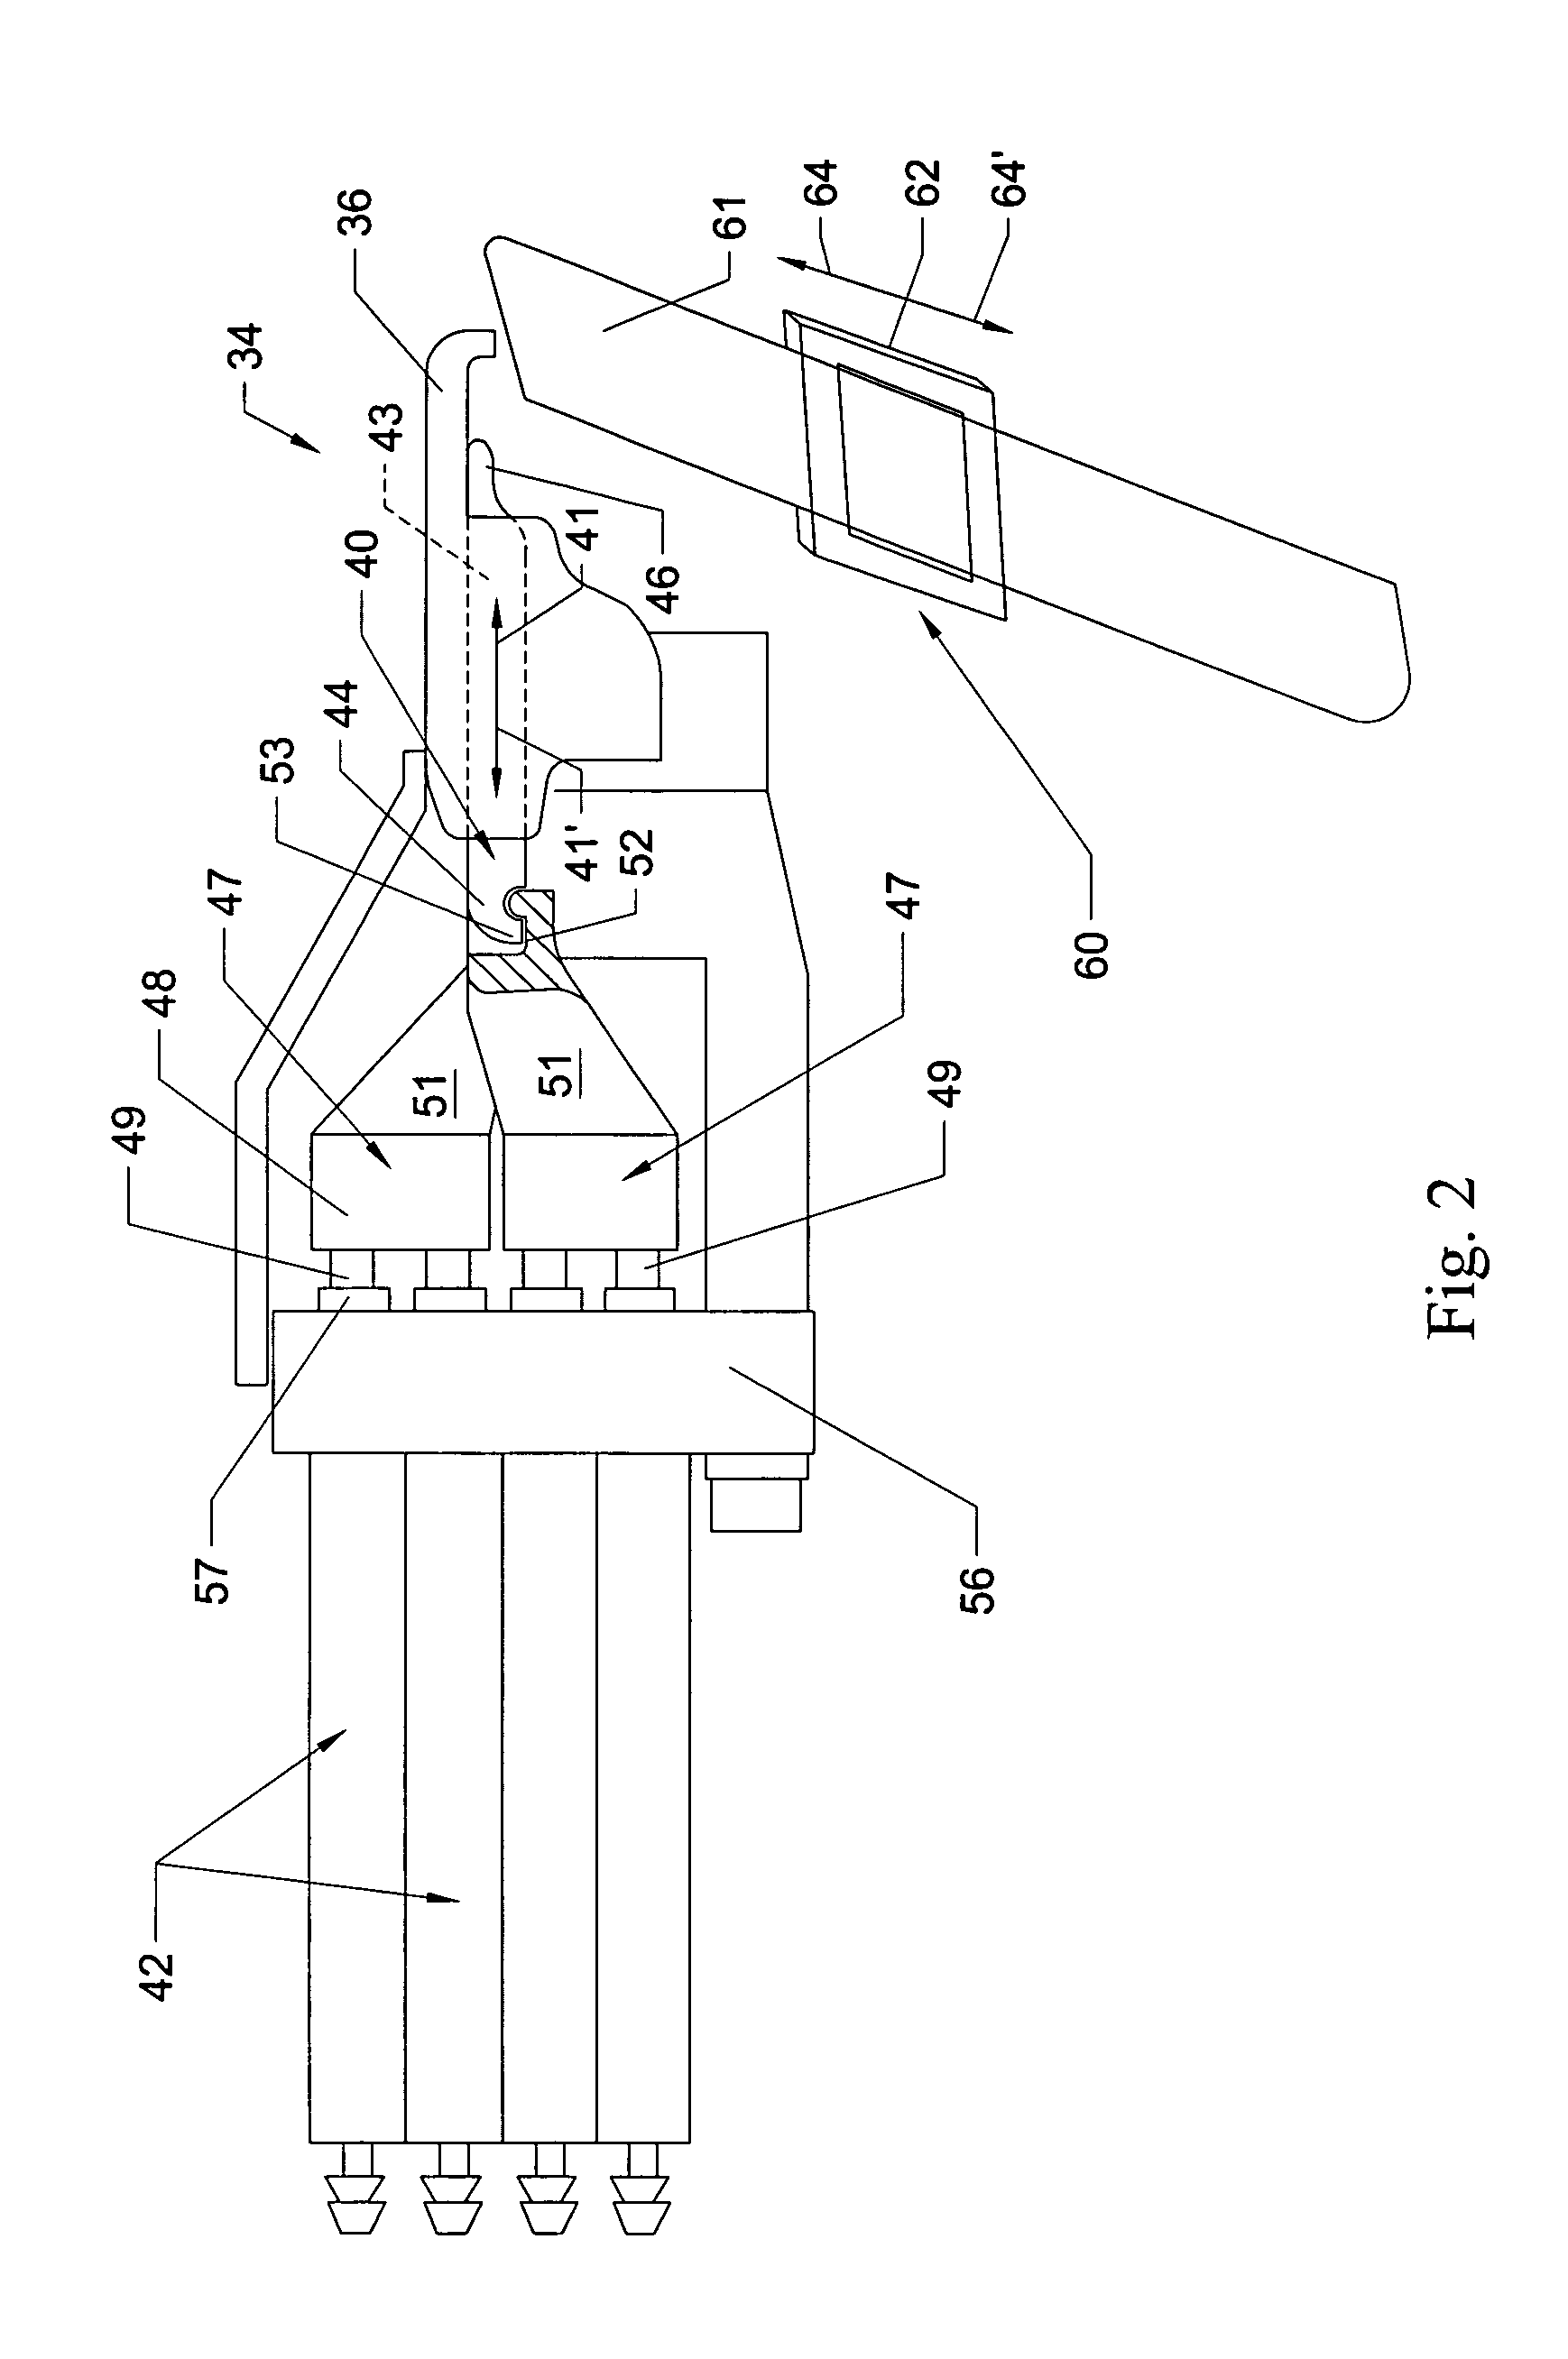 Control assembly for tufting machine